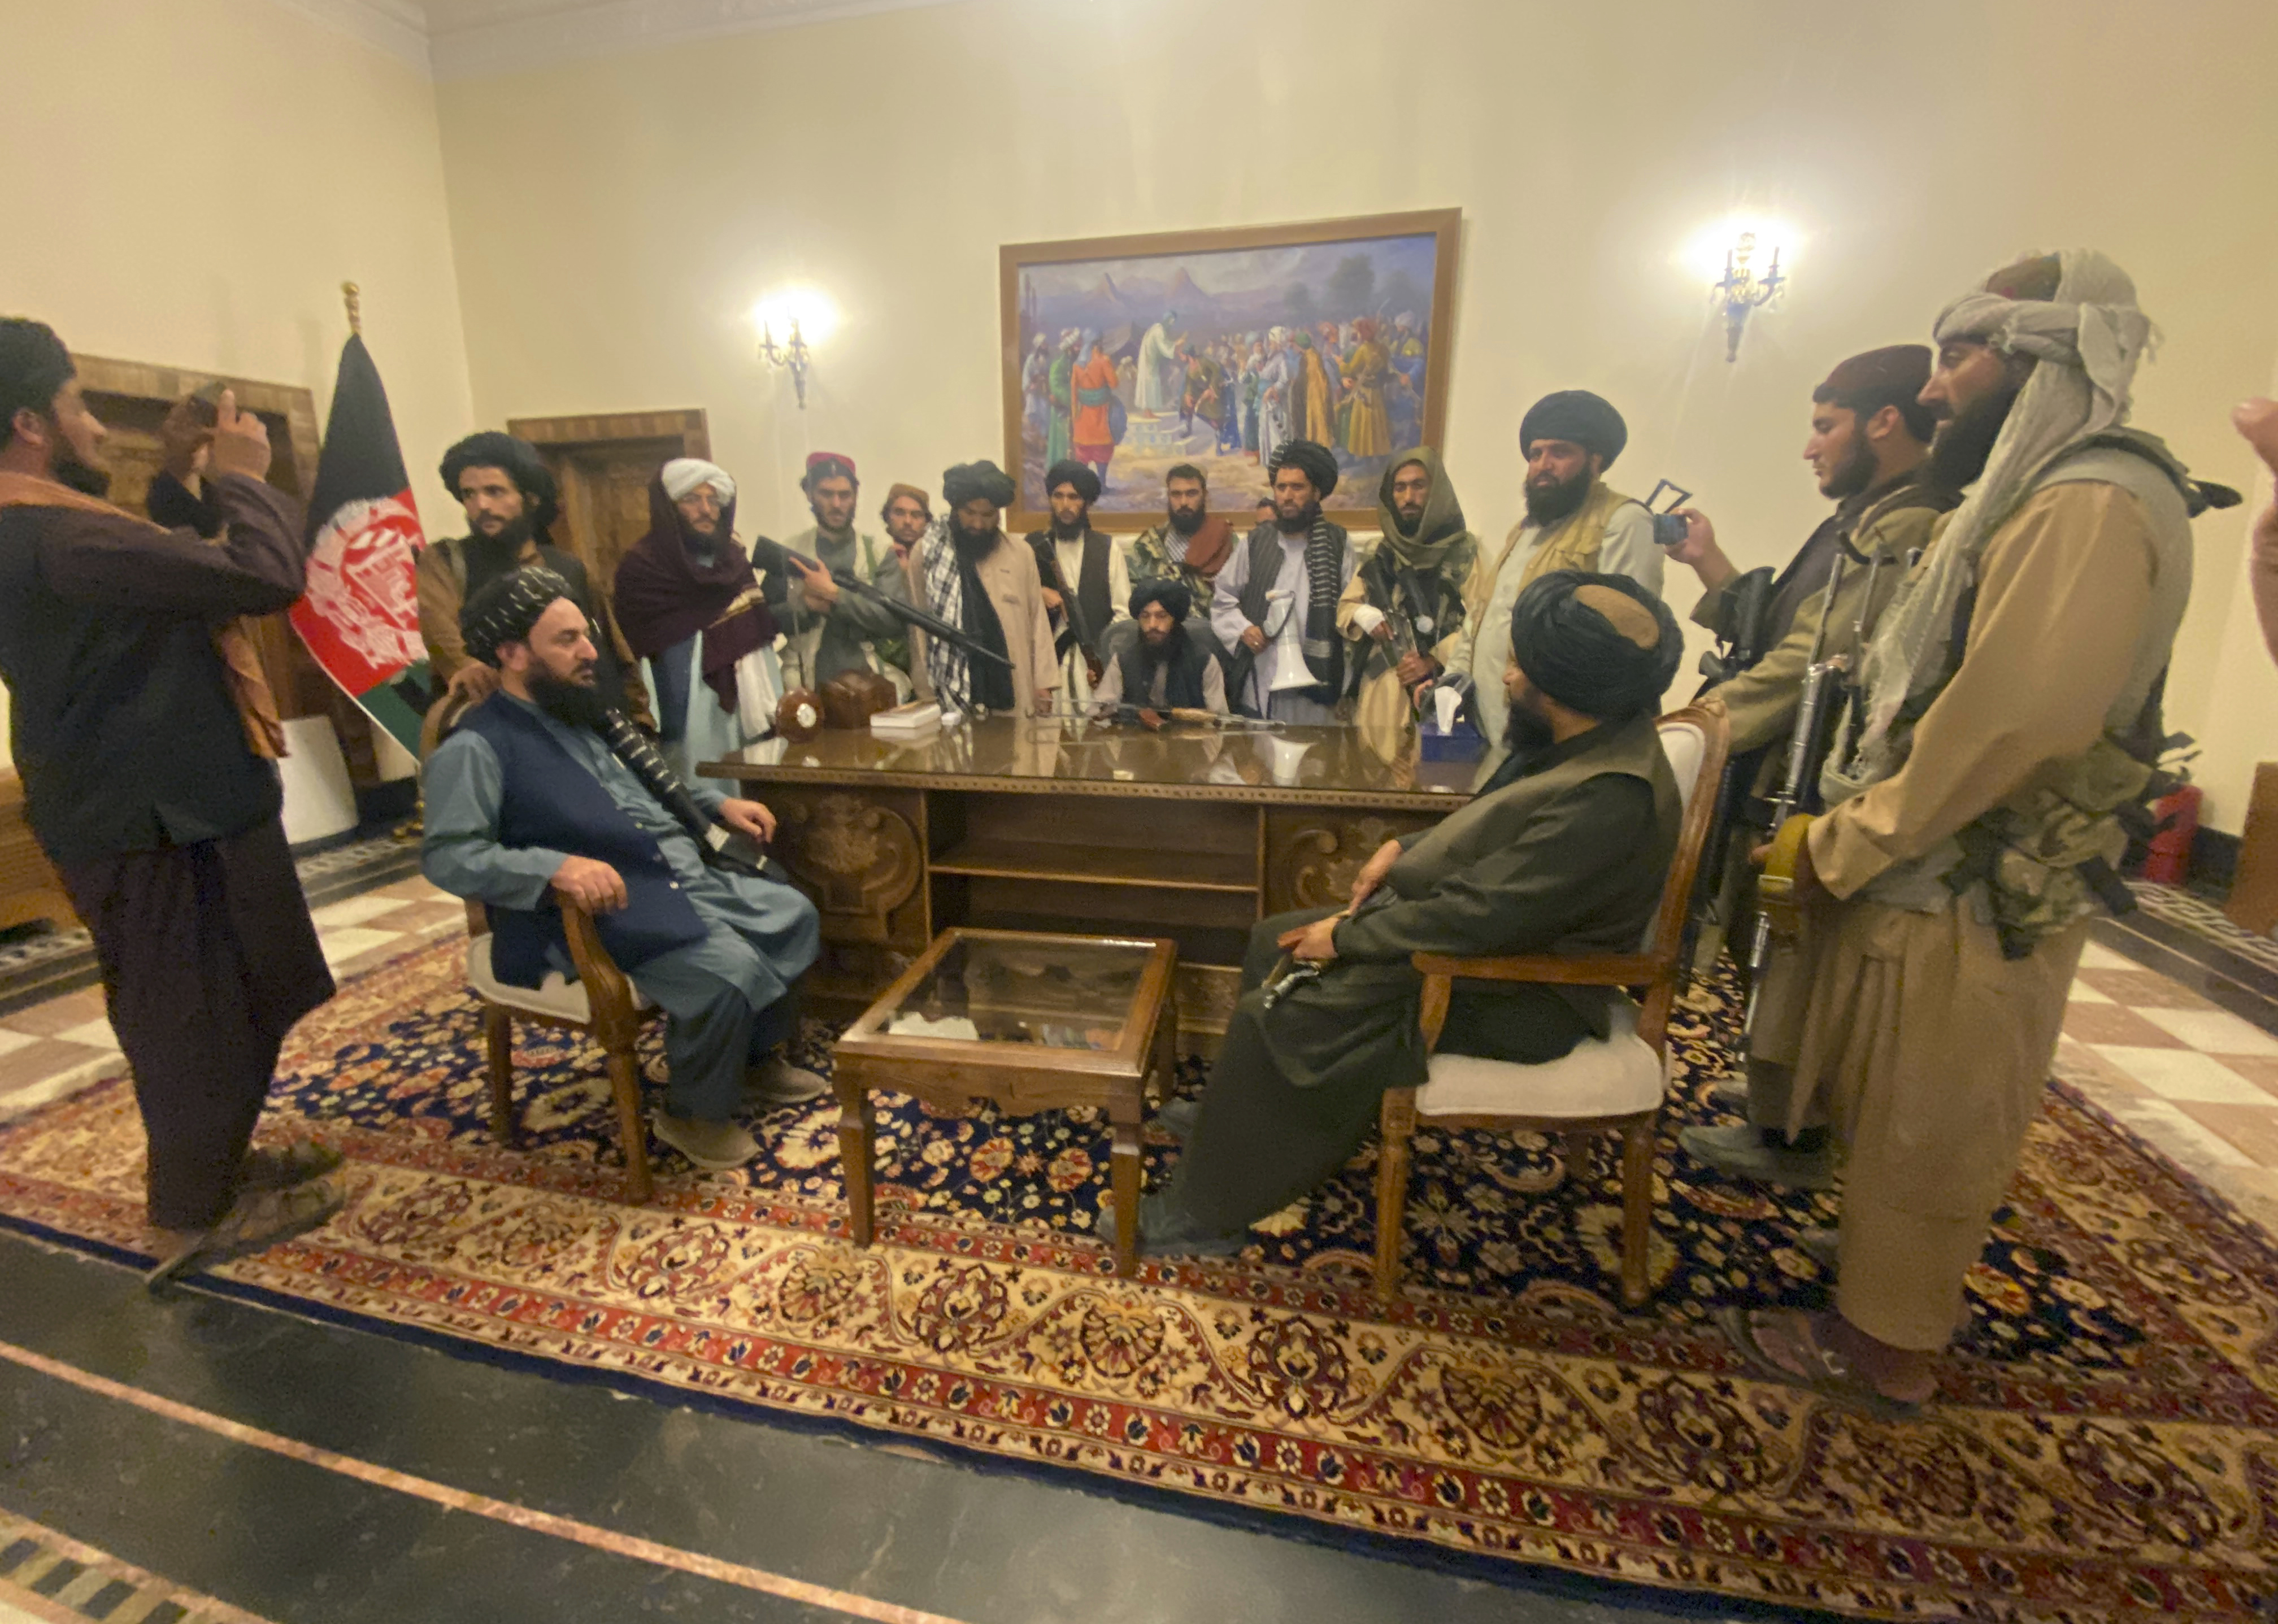 Taliban fighters take control of the Afghan presidential palace in Kabul after President Ashraf Ghani fled the country